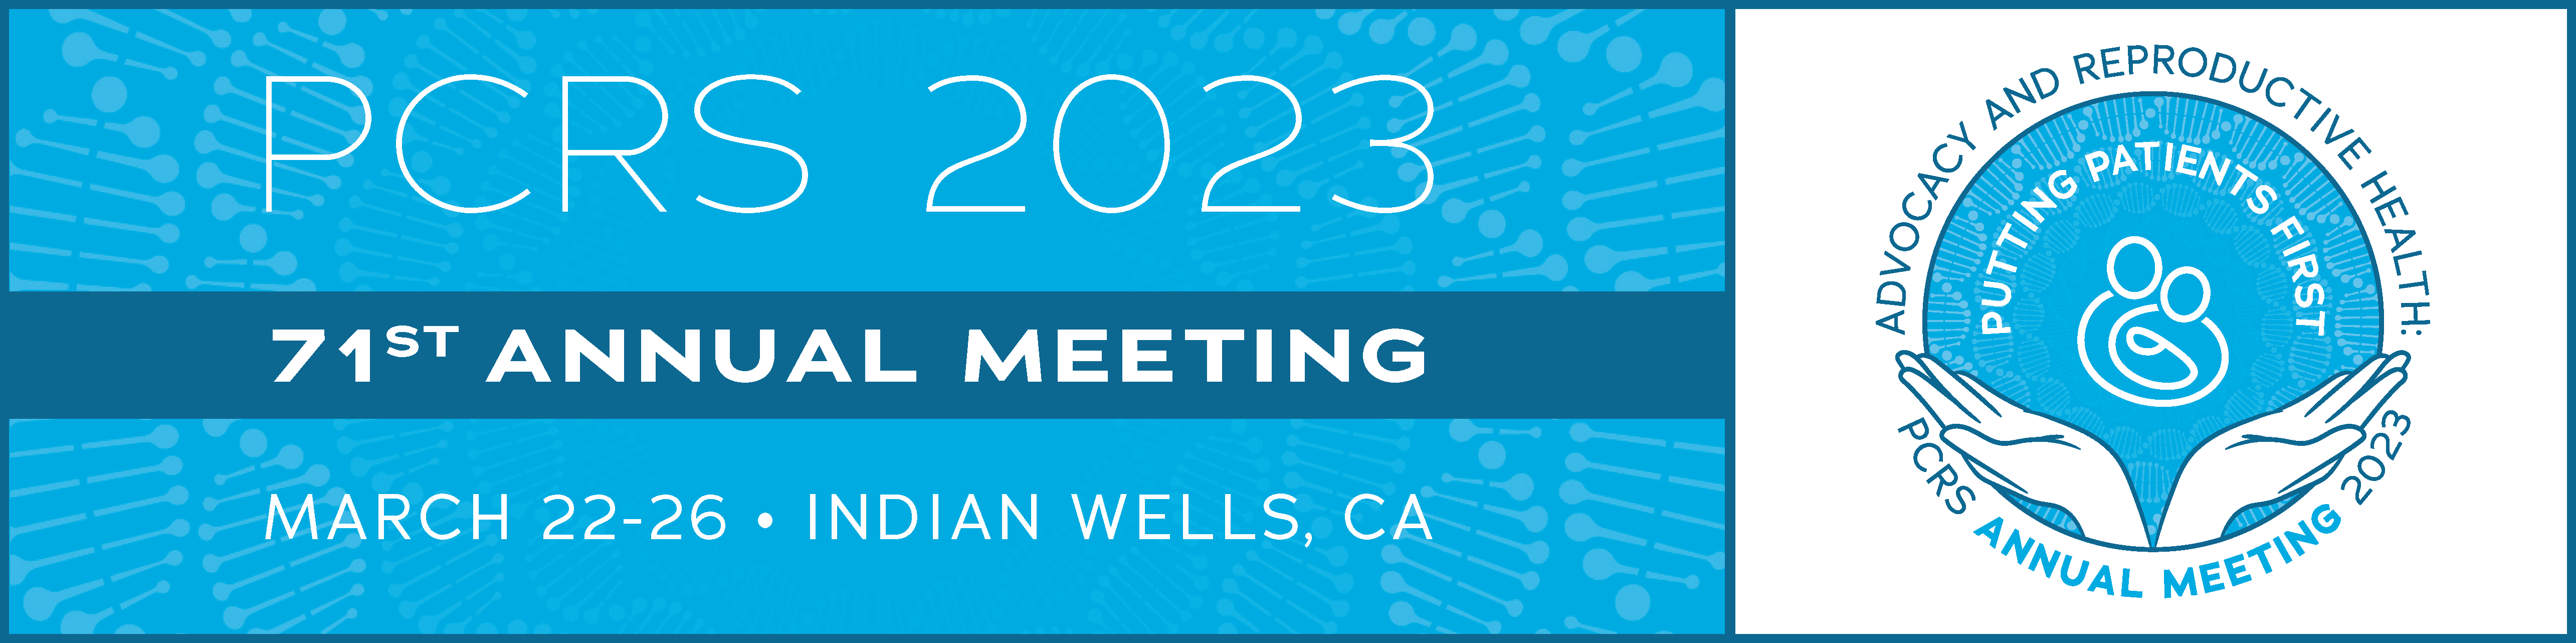 2022 PCRS Annual Meeting